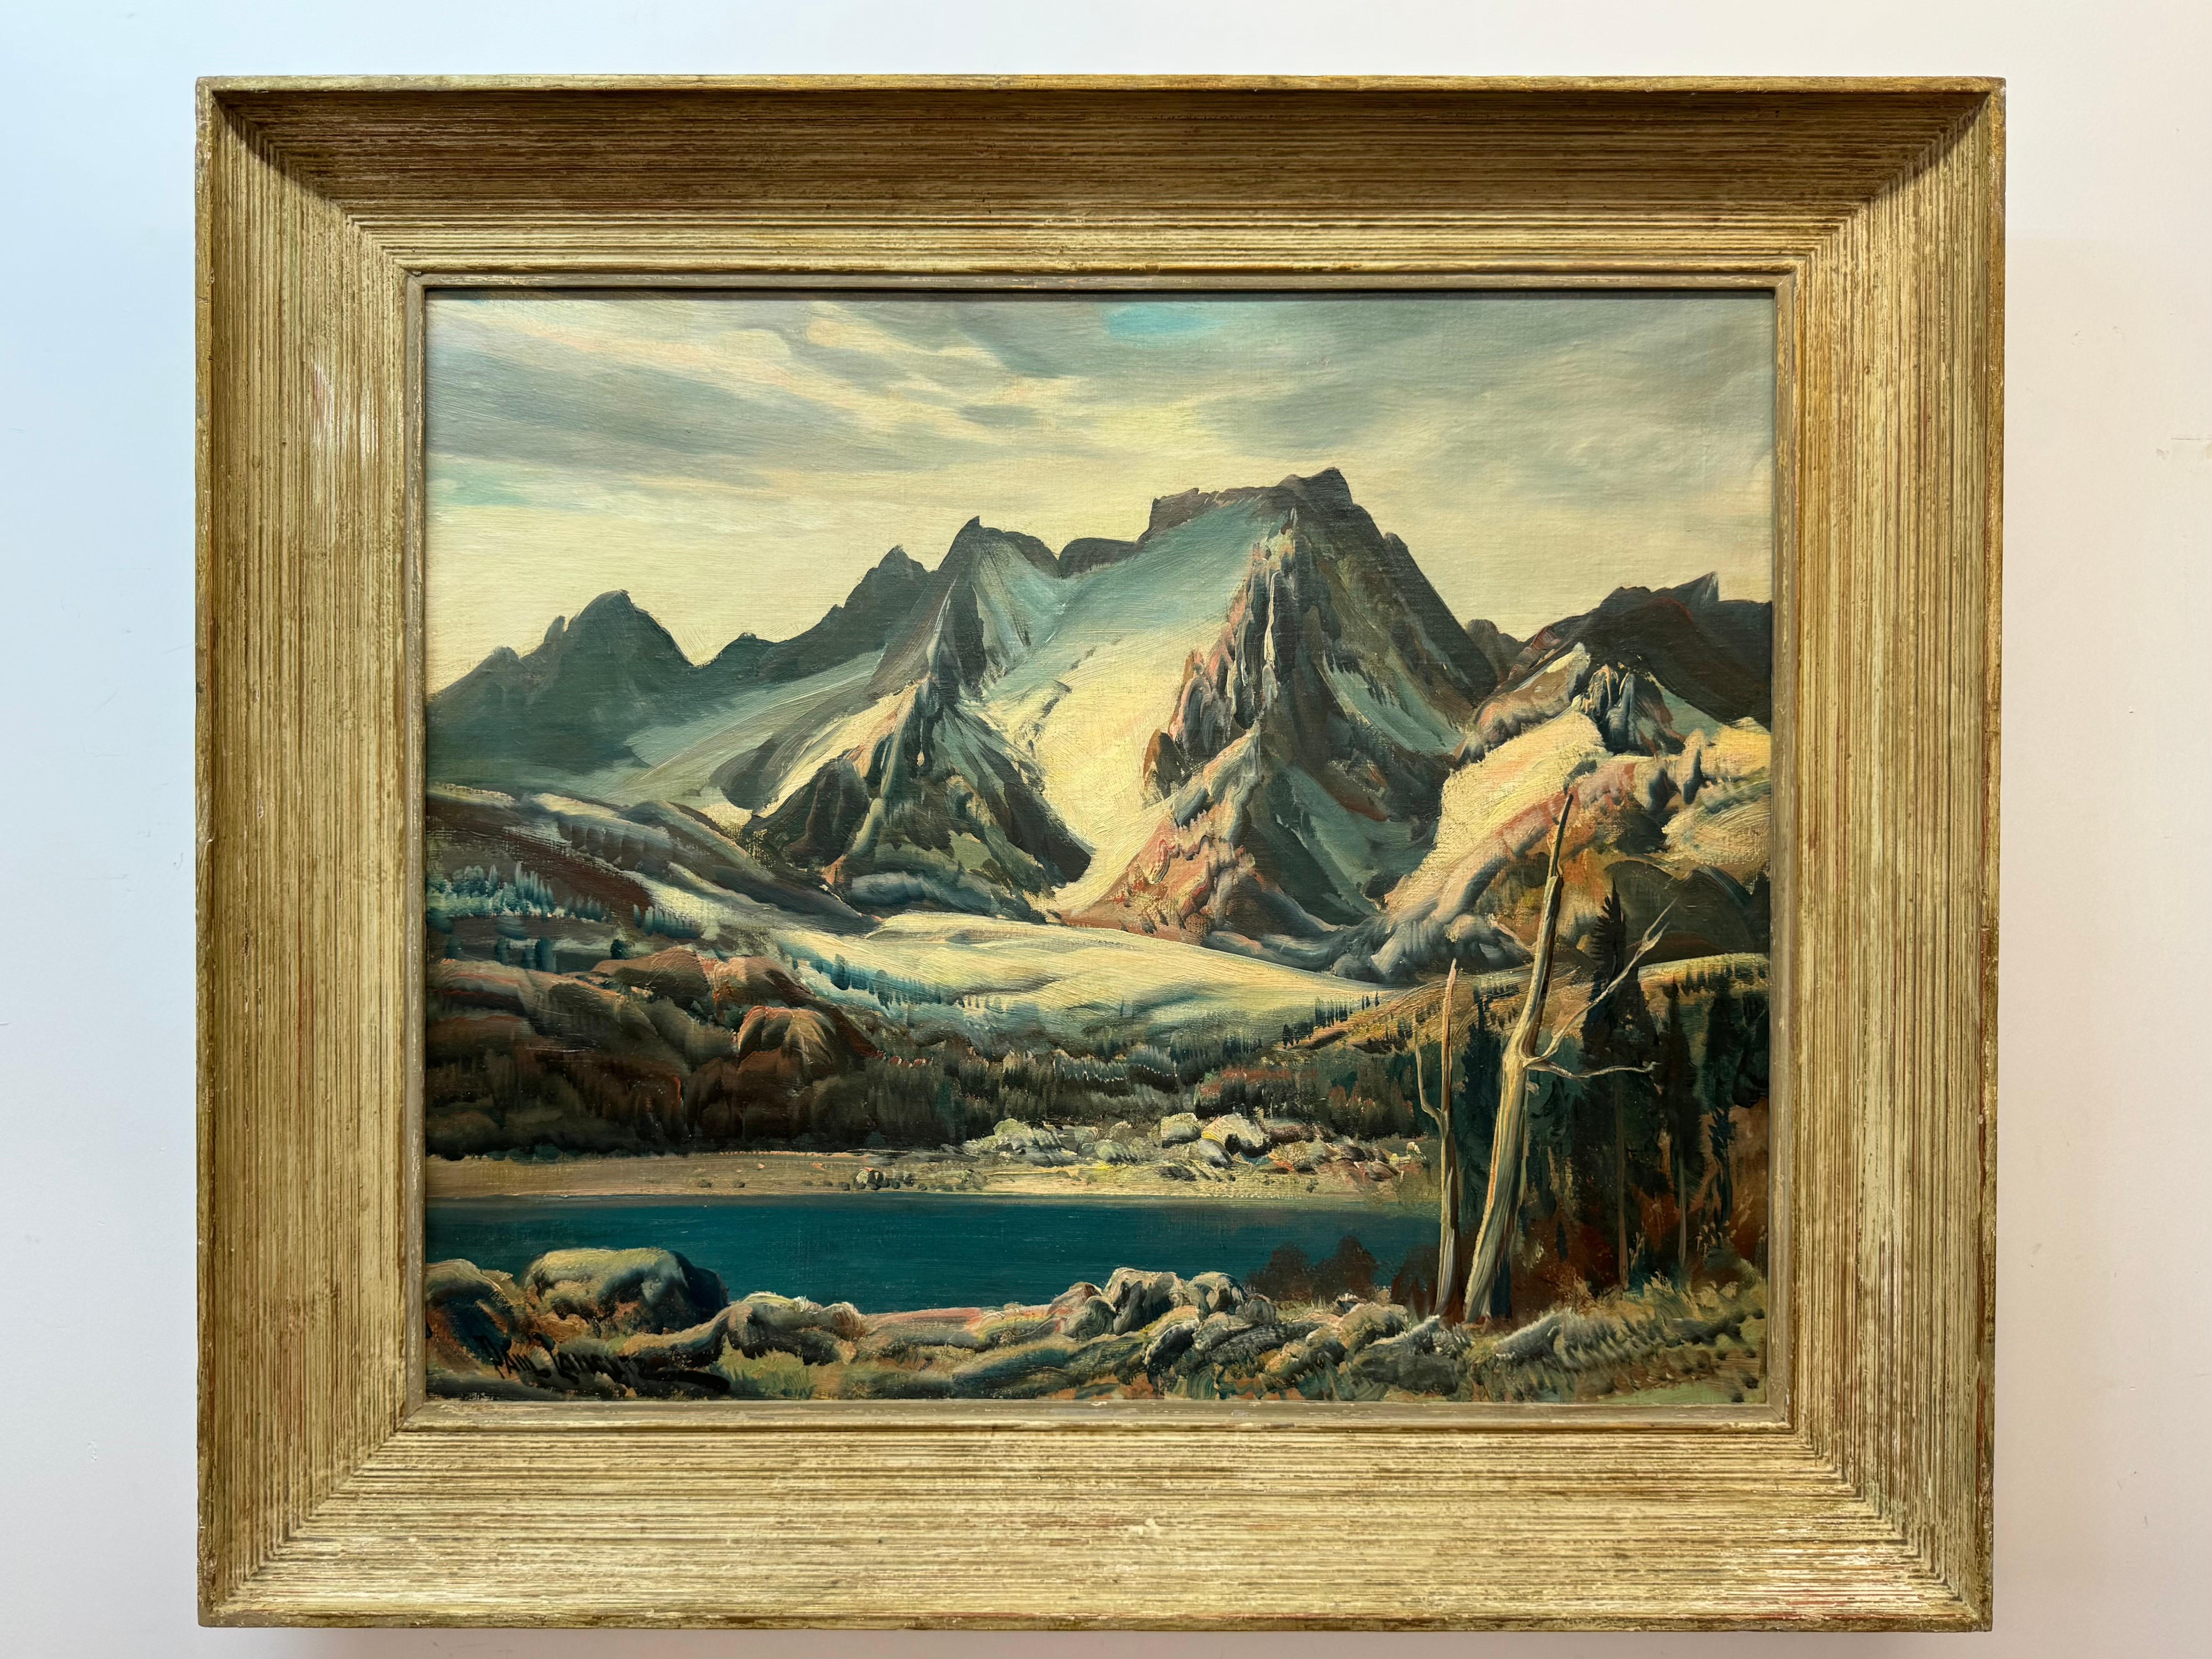 Paul Lauritz 
Born 1889, Norway died 1971 Los Angeles
Oil on wood
Mountain scape and river
32“ x 37.25 framed 25 x 30.5 unframed